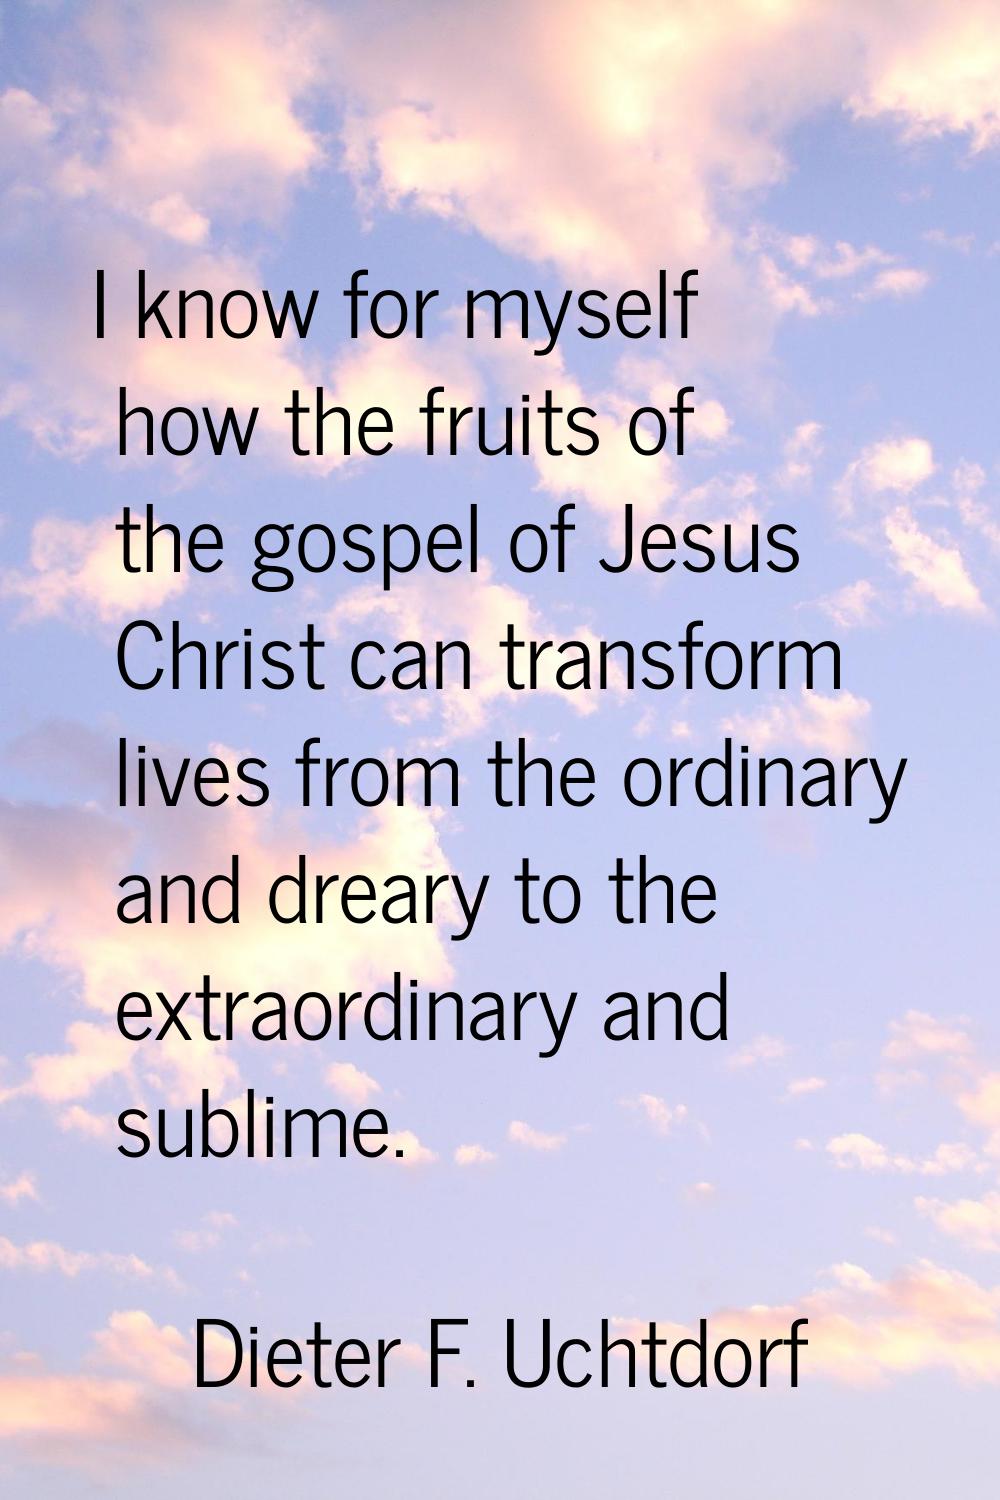 I know for myself how the fruits of the gospel of Jesus Christ can transform lives from the ordinar